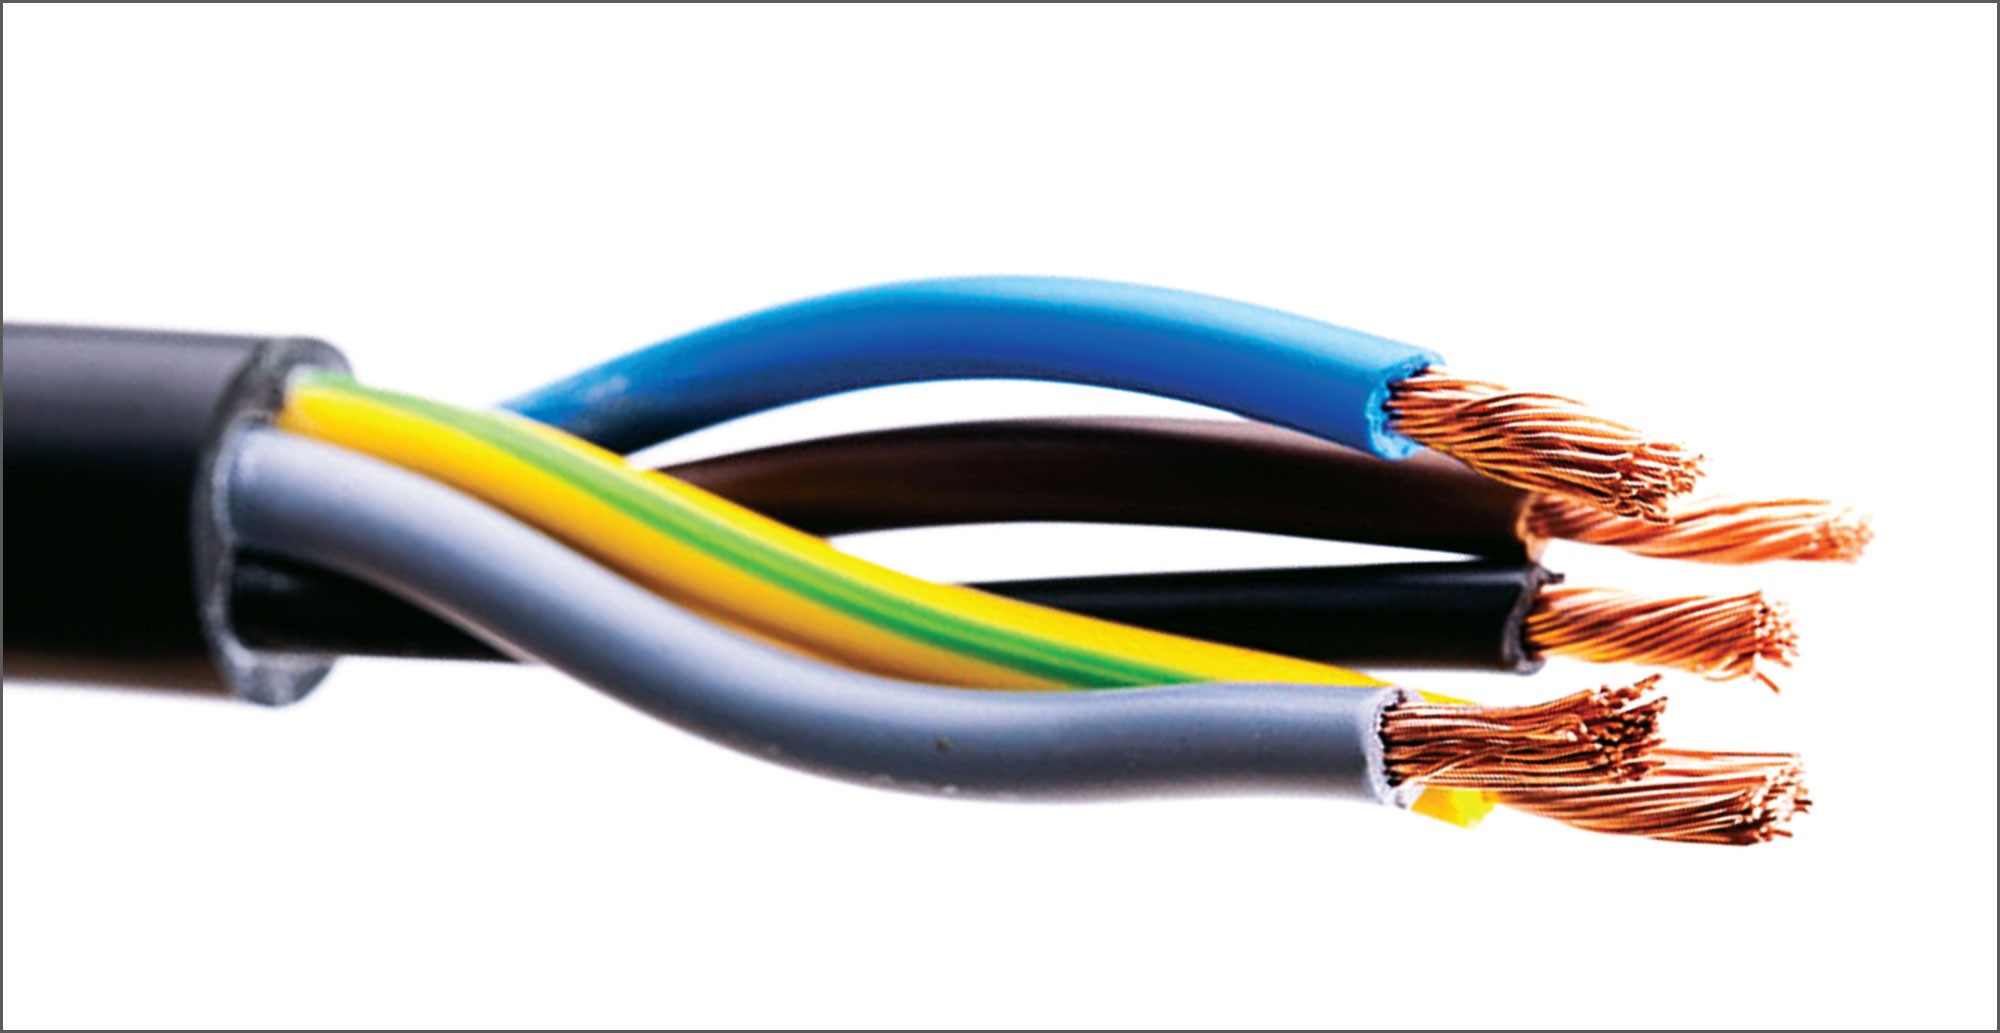 Wire & cable Industry Growth, wire & cable brands